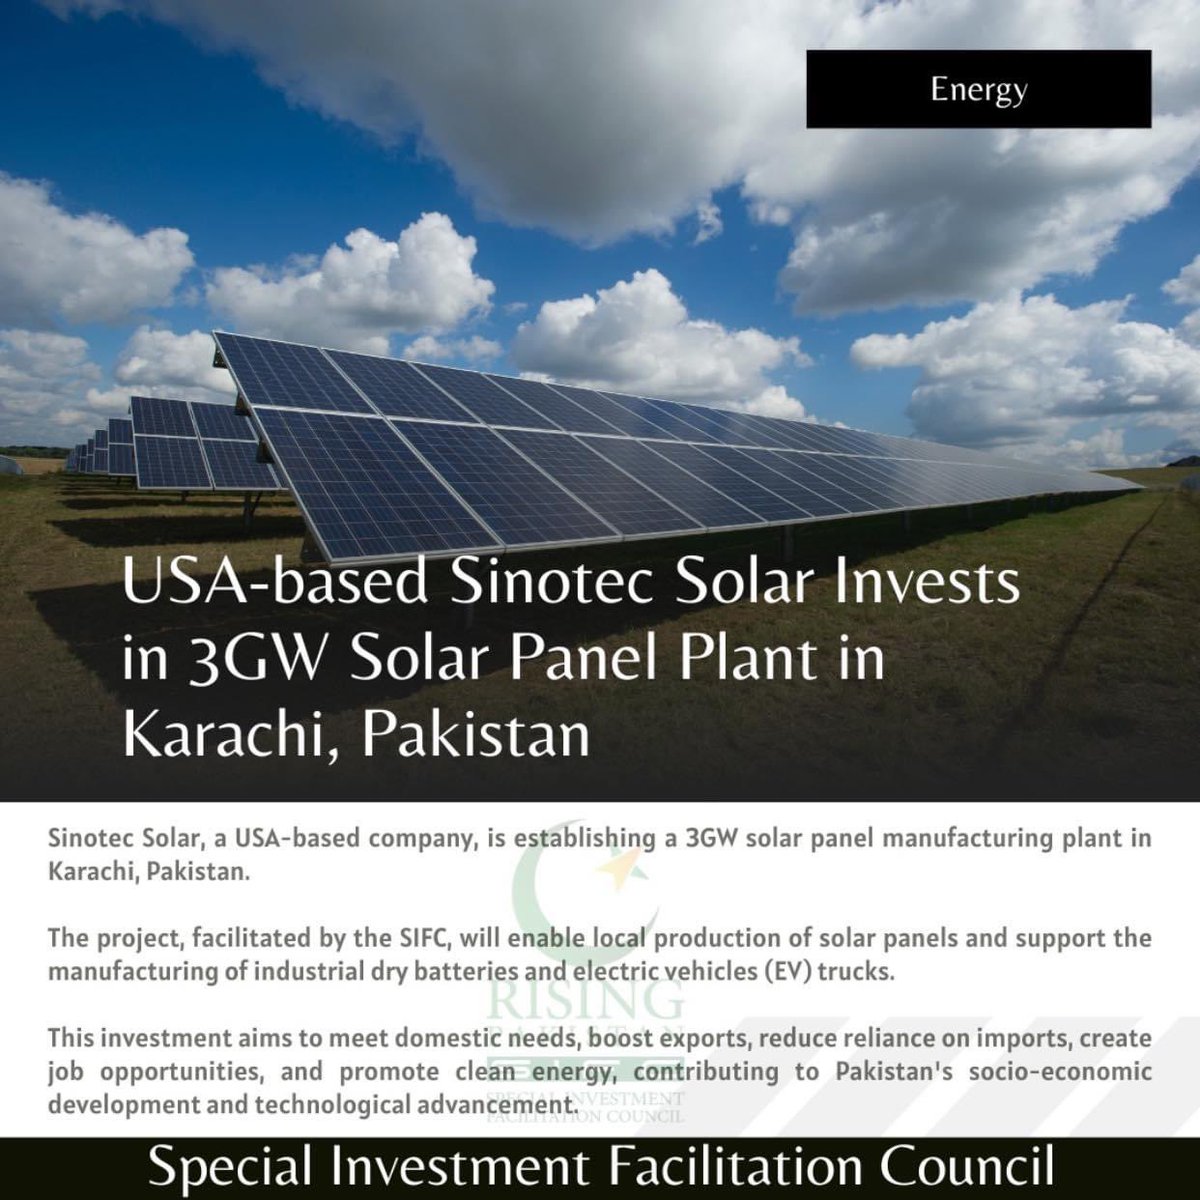 Sinotec Solar is establishing a 3GW solar panel manufacturing plant in Karachi, aiming to boost local production, reduce reliance on imports, and promote #CleanEnergy, propelling Pakistan’s #SustainableDevelopment 🇵🇰 🔗 sifc.gov.pk #SIFC #SIFCPakistan #SolarPower